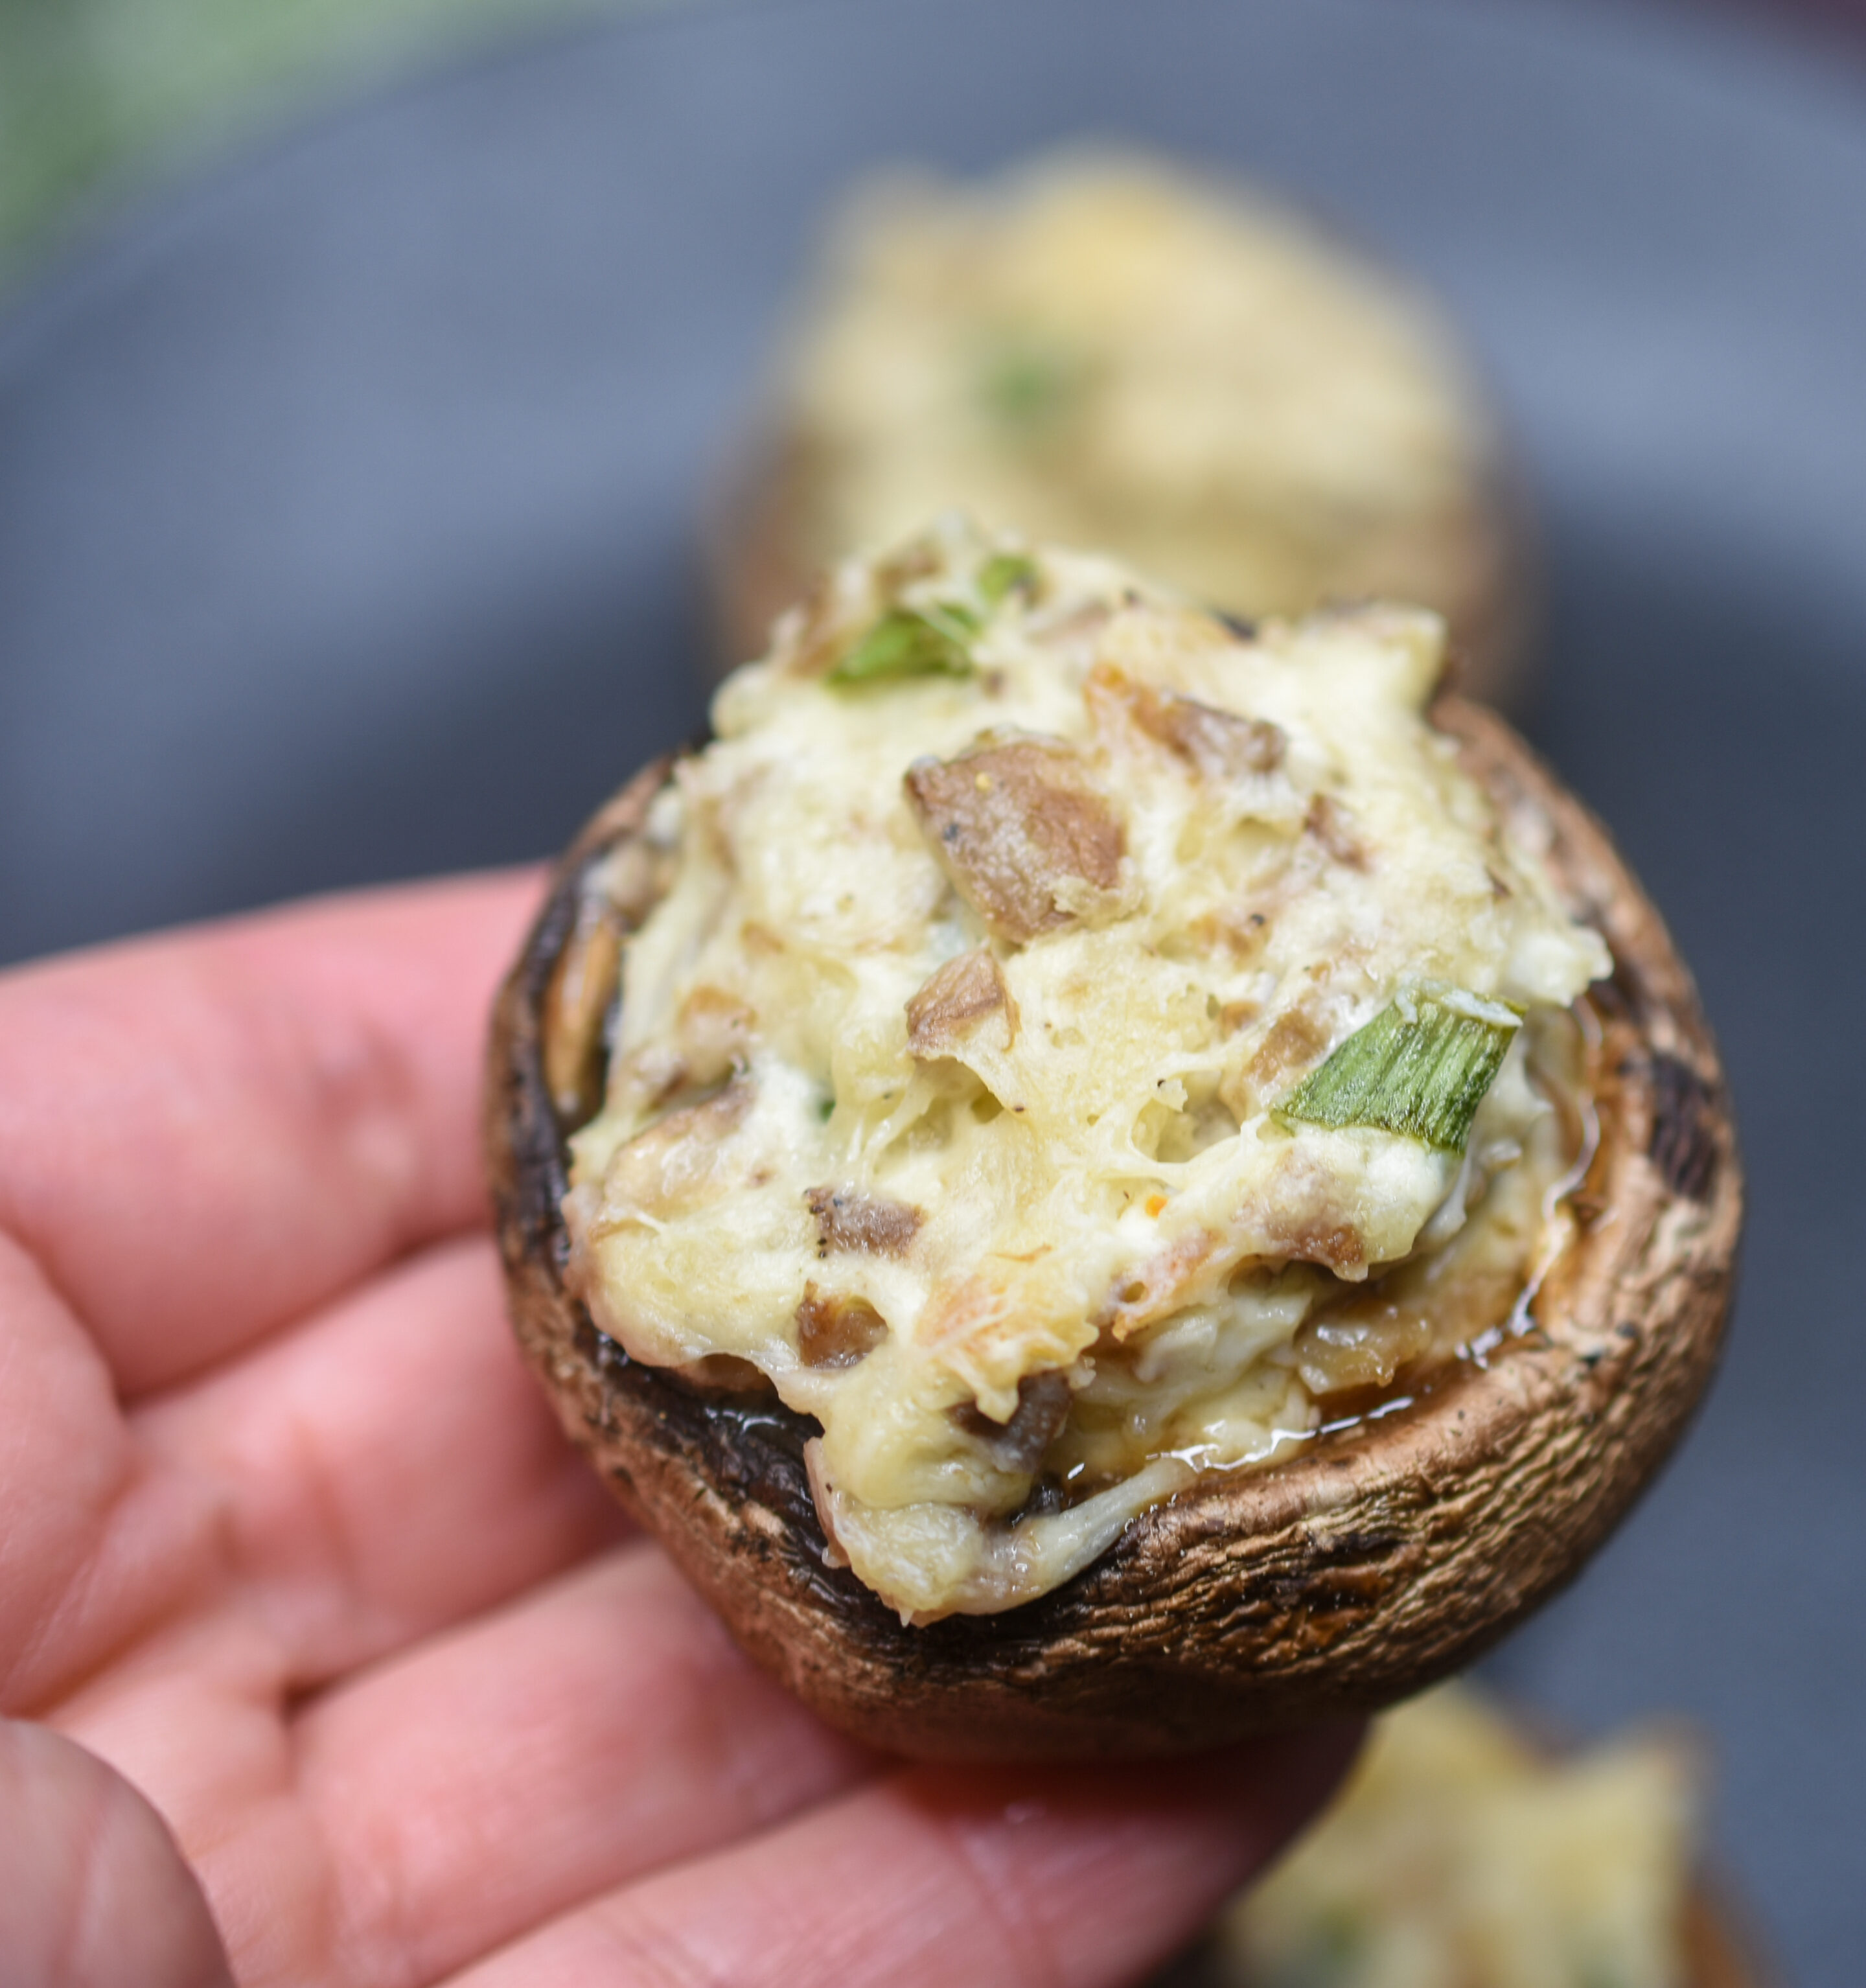 Easy Stuffed Mushrooms Recipe made either vegetarian or with sausage.